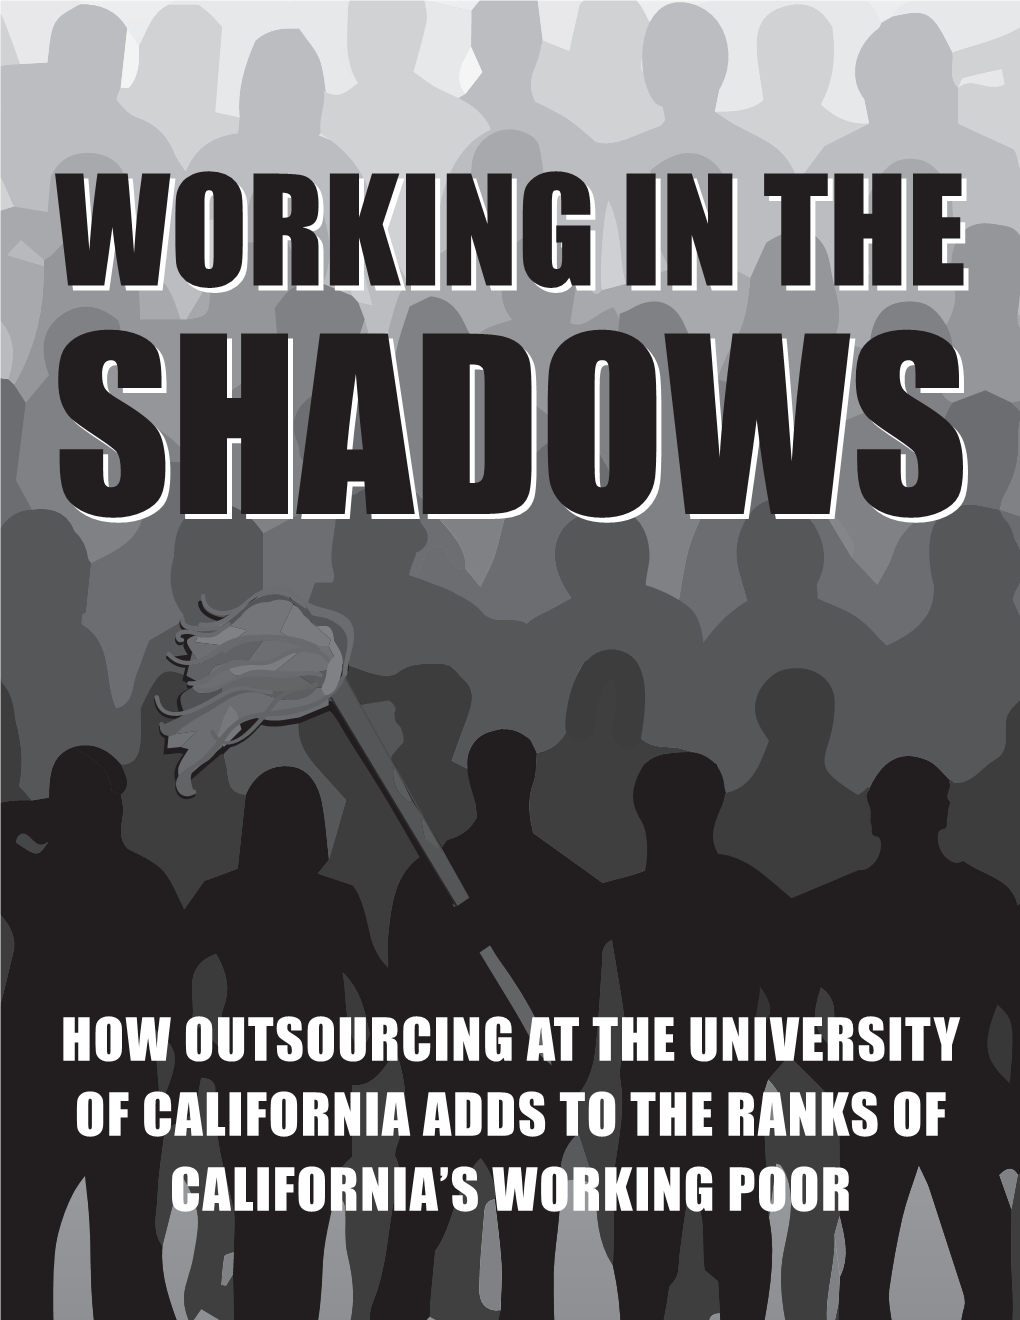 How Outsourcing at the University of California Adds to the Ranks of California's Working Poor